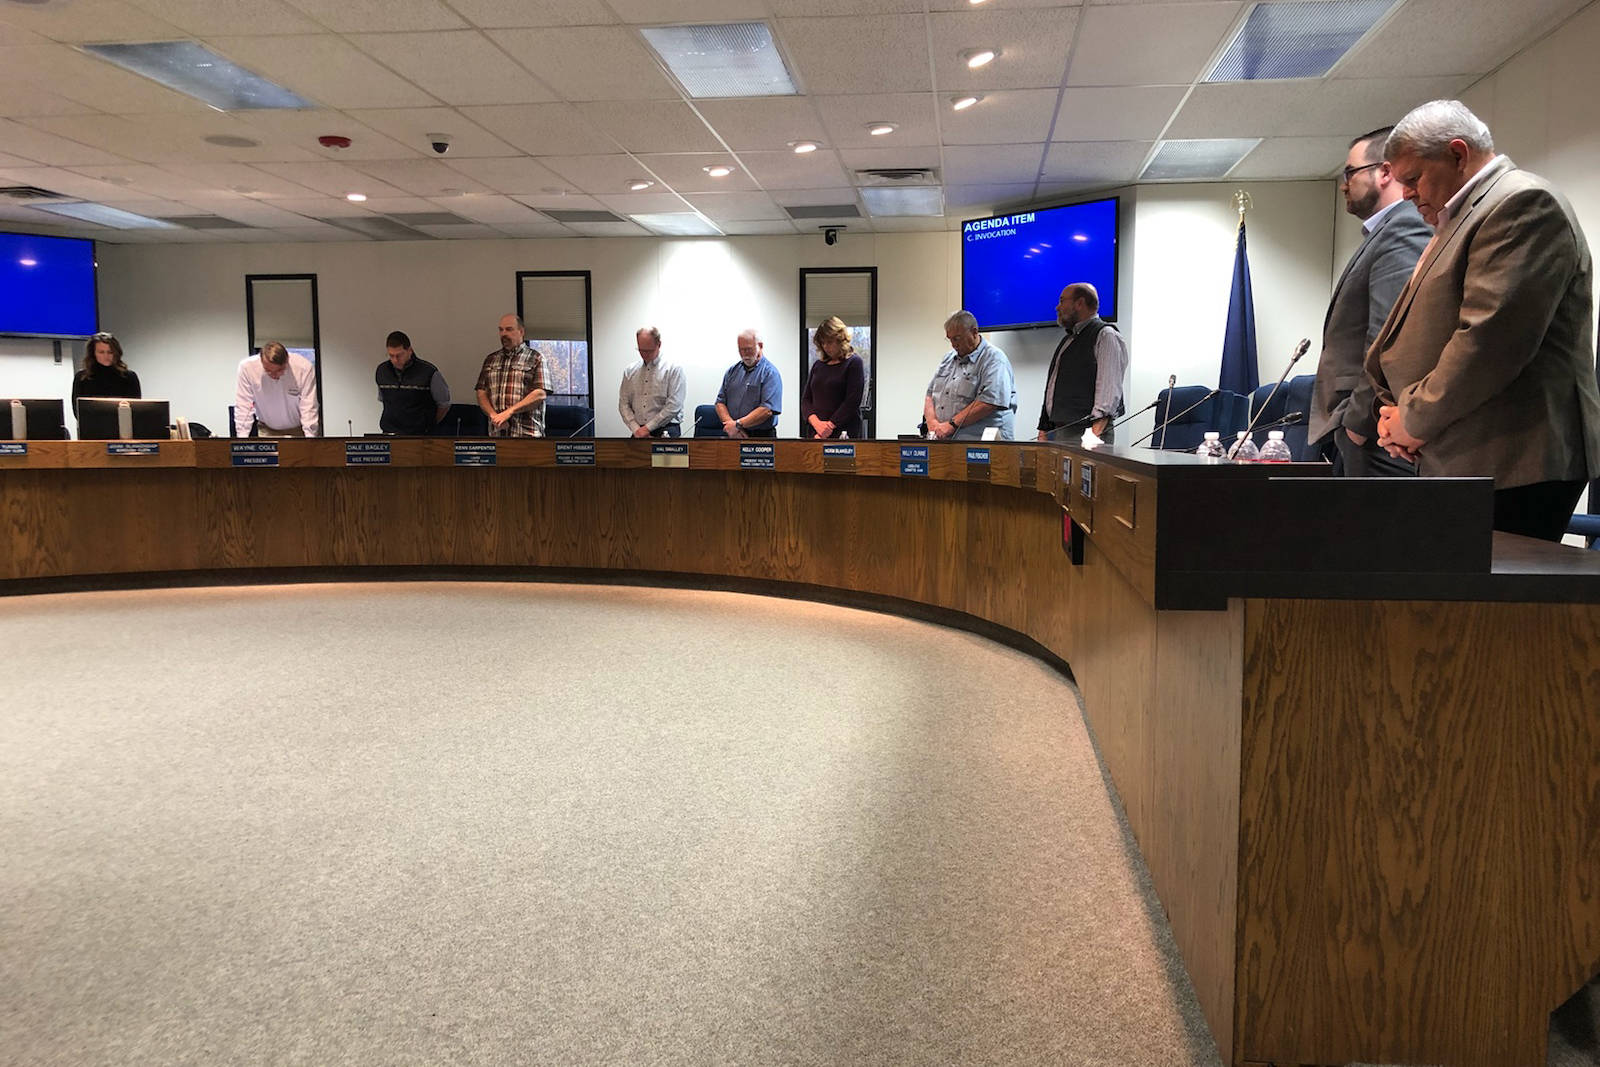 Members of the Kenai Peninsula Borough Assembly hold a religious invocation during the Tuesday, Oct. 9, 2018, assembly meeting in Soldotna, Alaska. (Photo by Victoria Petersen/Peninsula Clarion)